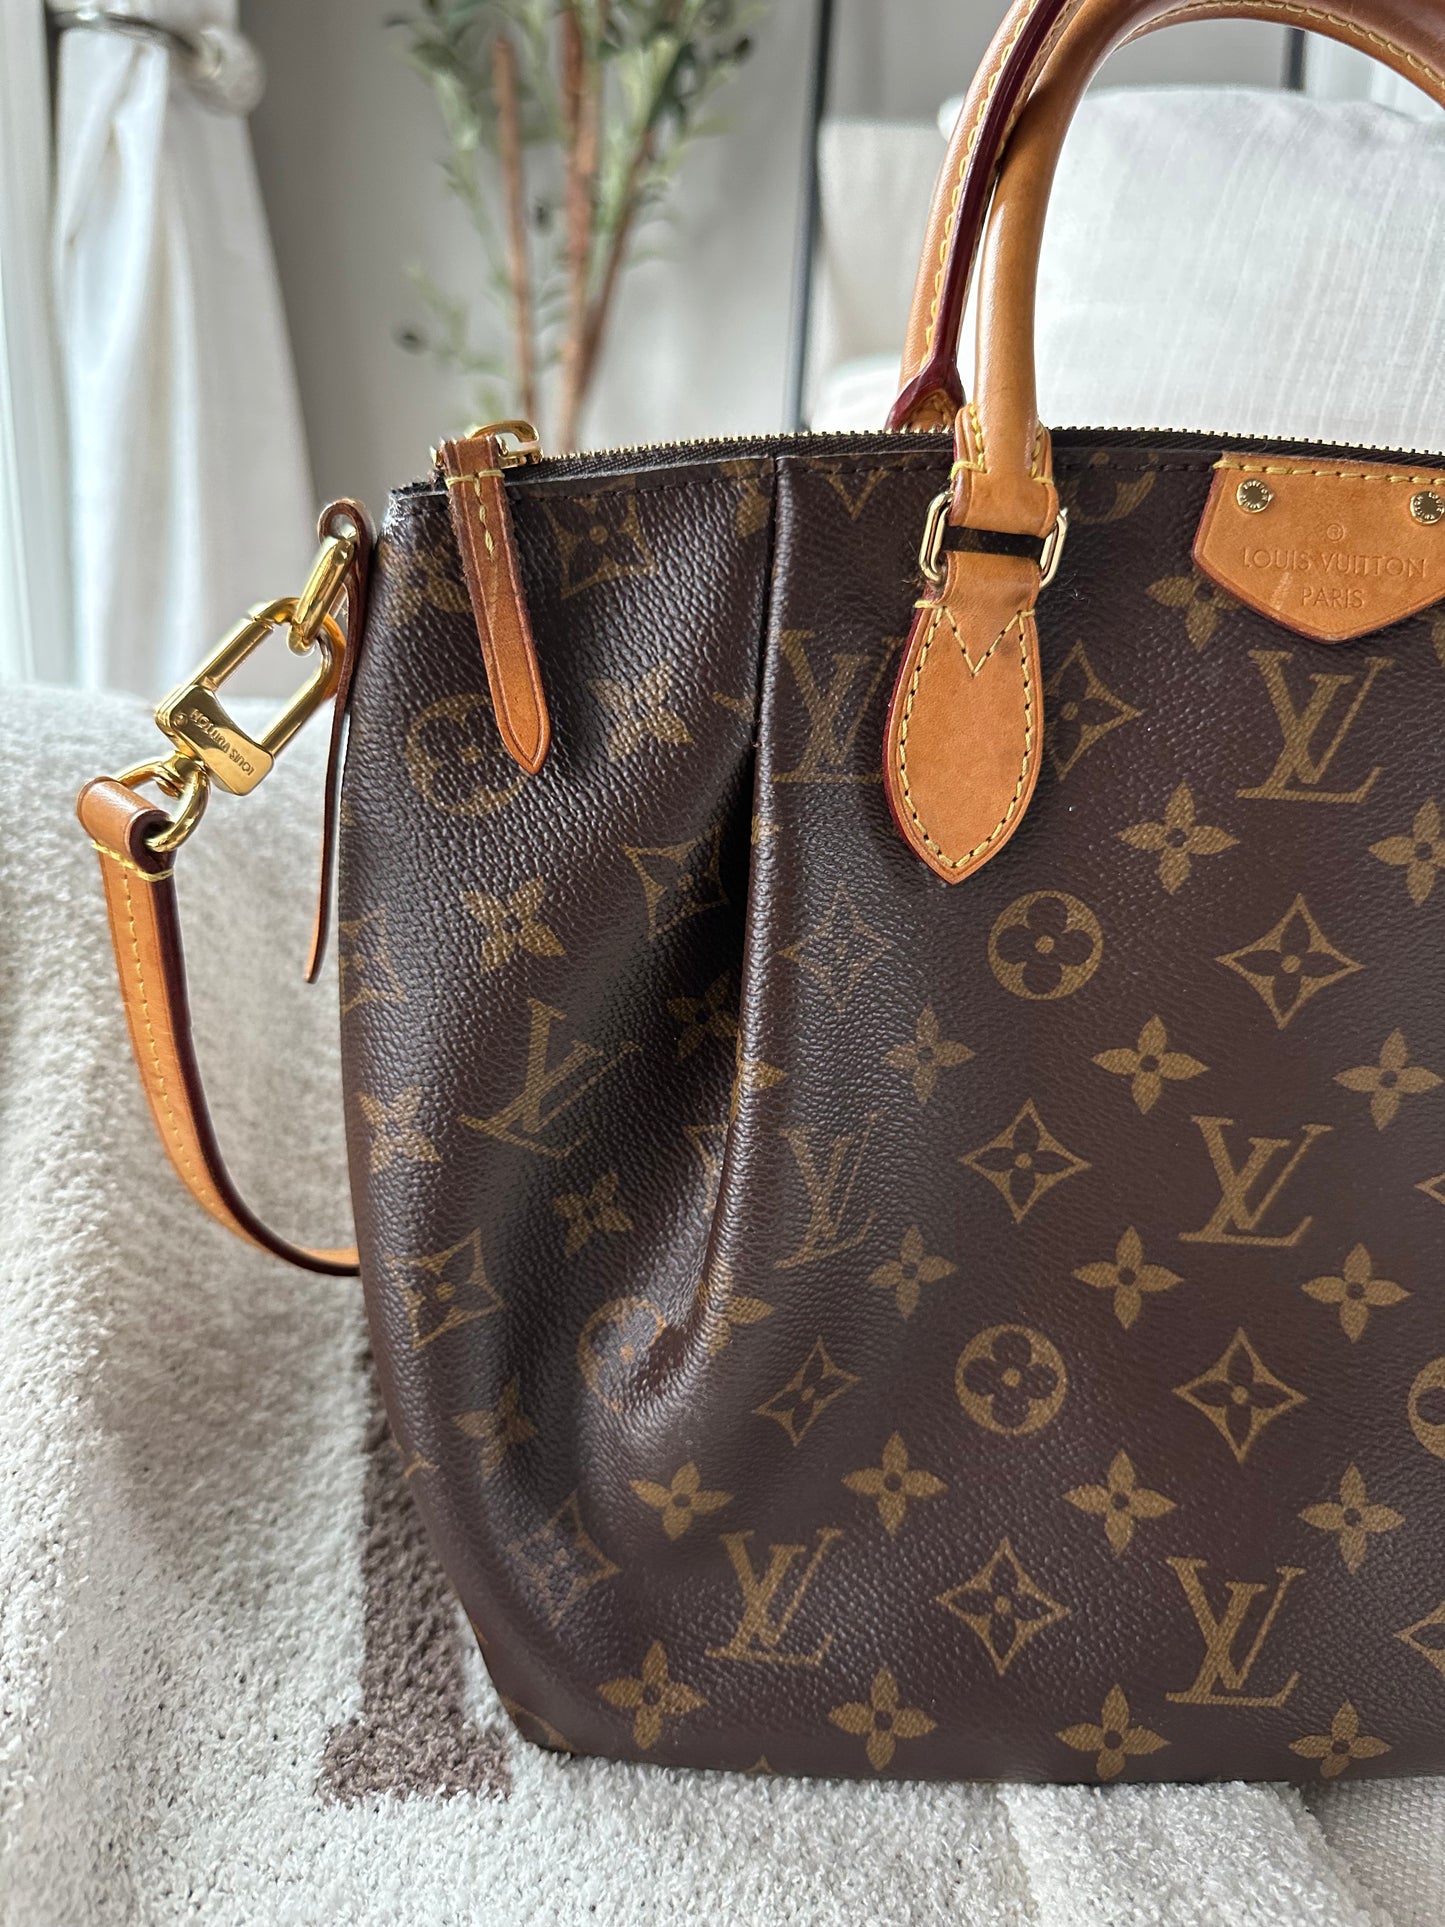 Decisions decisions! (Louis Vuitton Metis pm and turenne mm